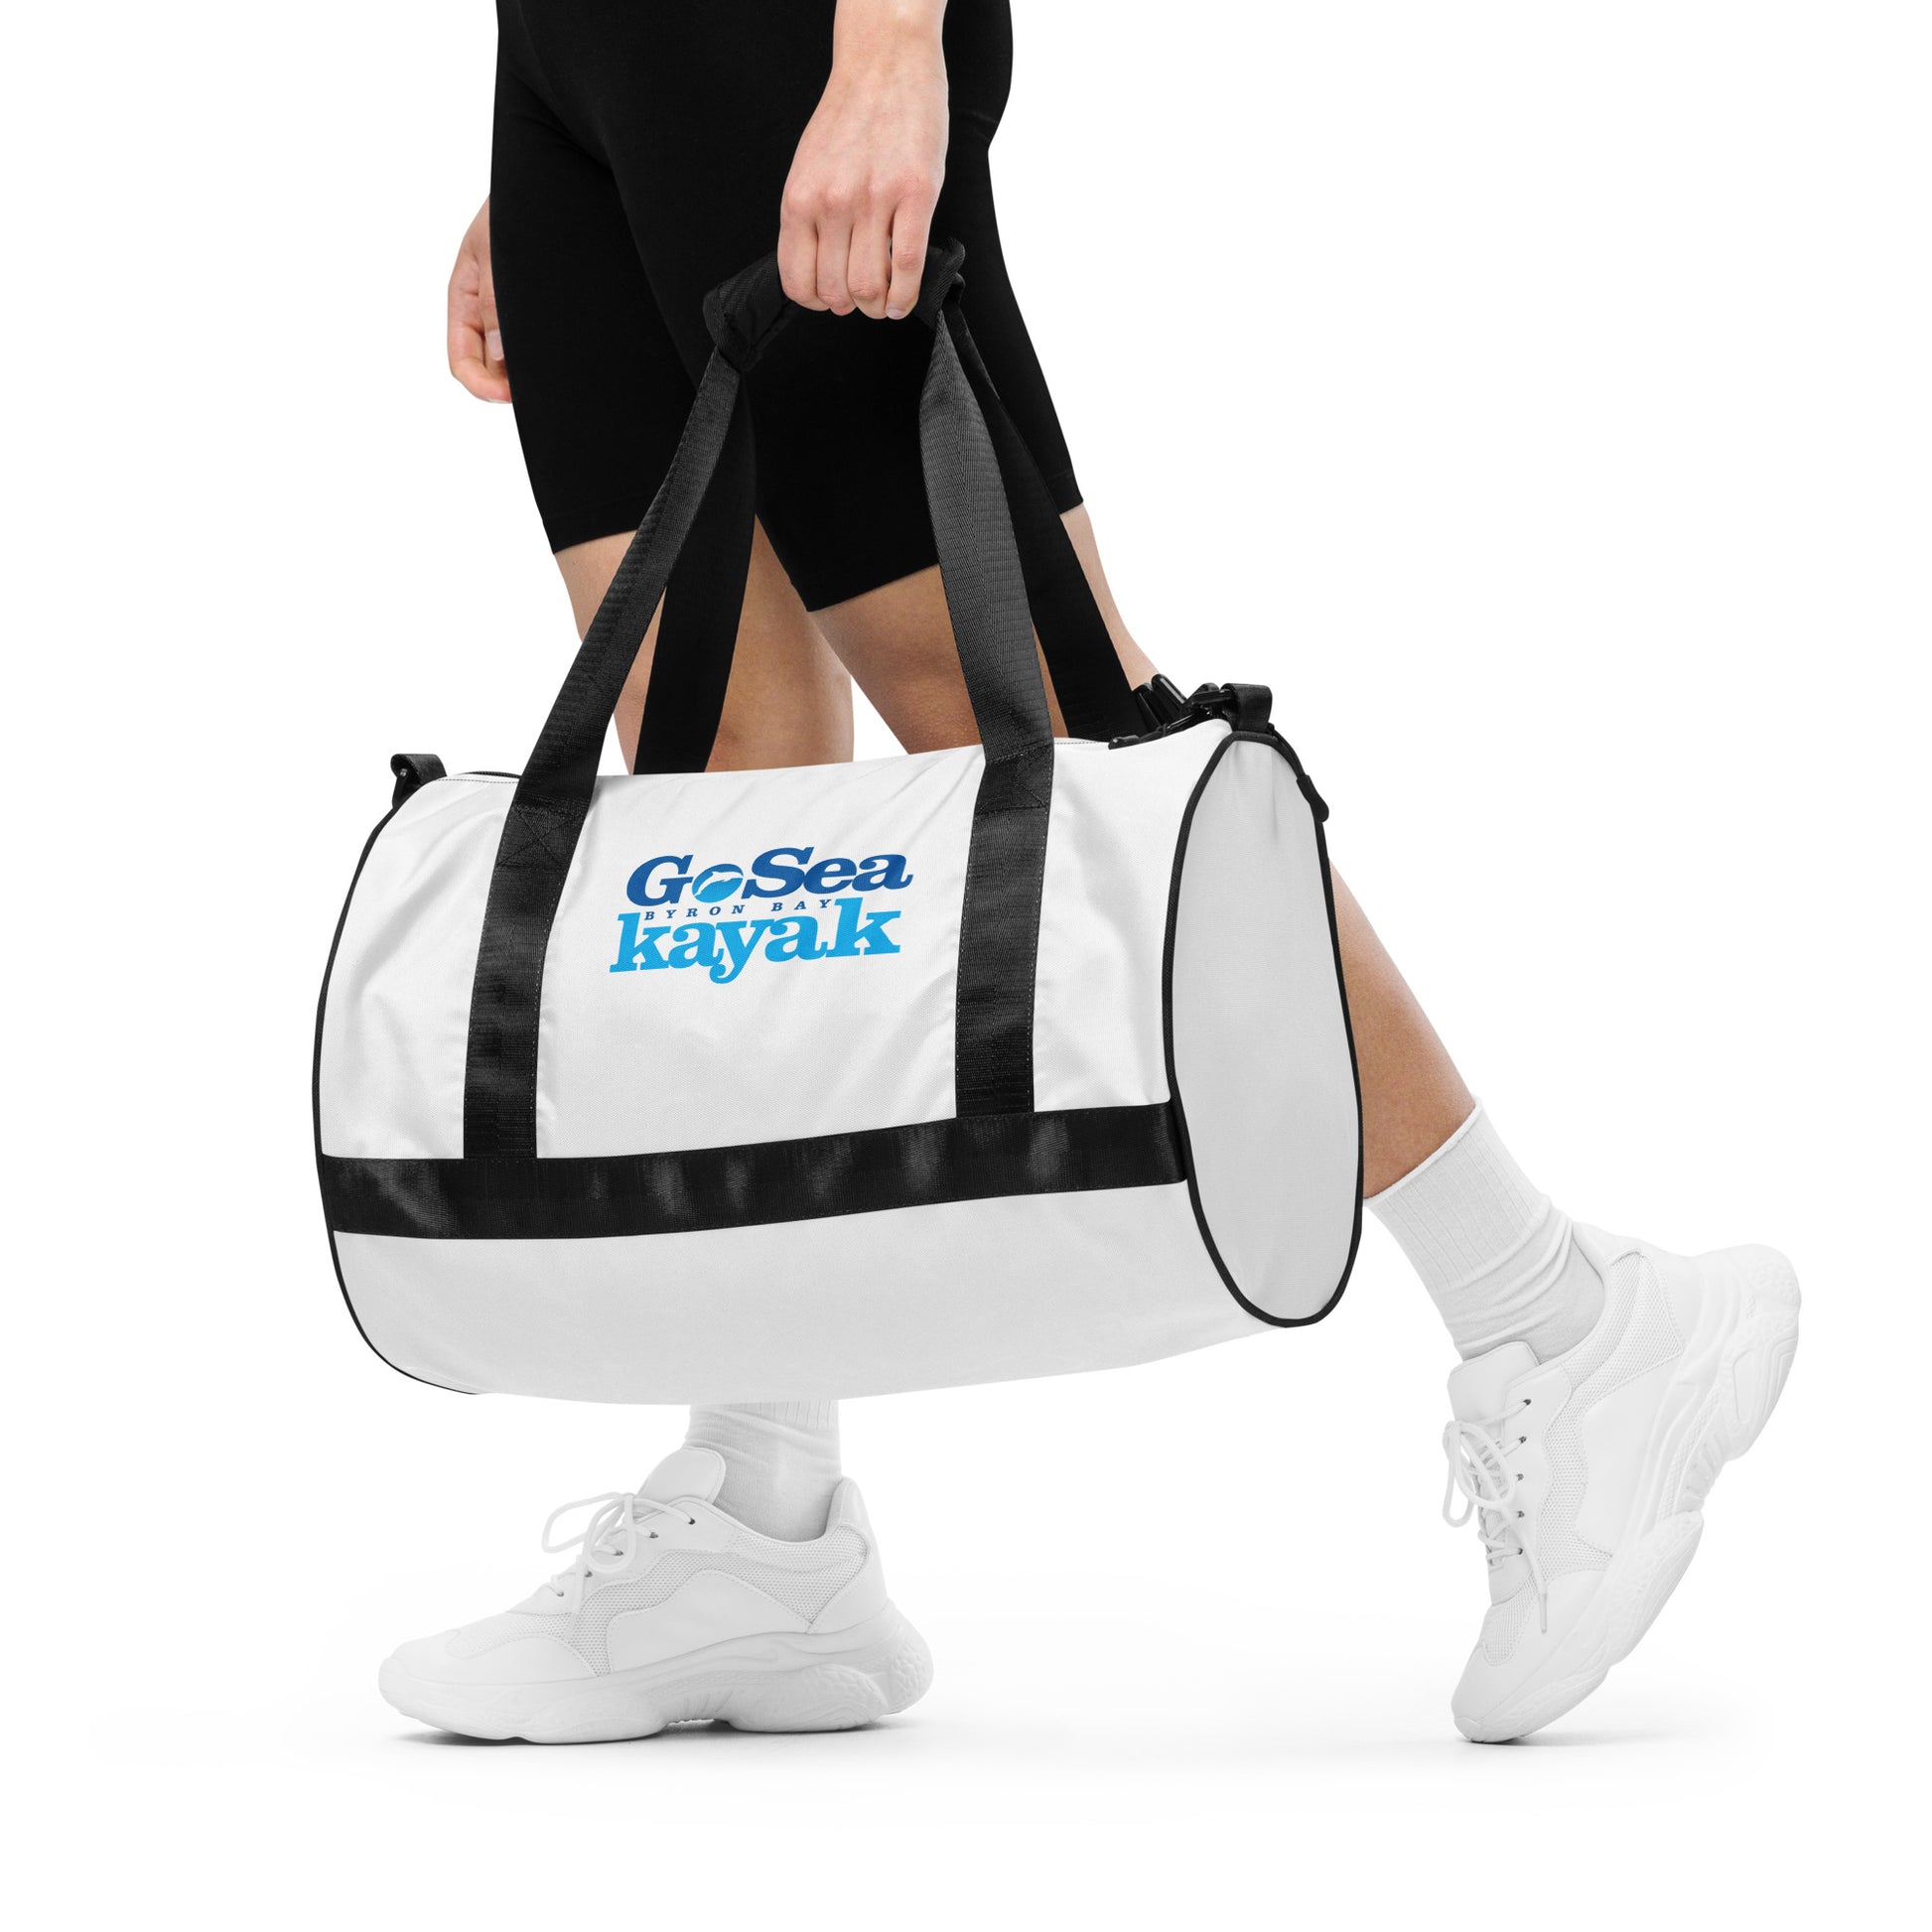  Gym Bag - White with black trim/detail - Side view, being held by man walking - With Go Sea Kayak Byron Bay logo on both sides - Genuine Byron Bay Merchandise | Produced by Go Sea Kayak Byron Bay 